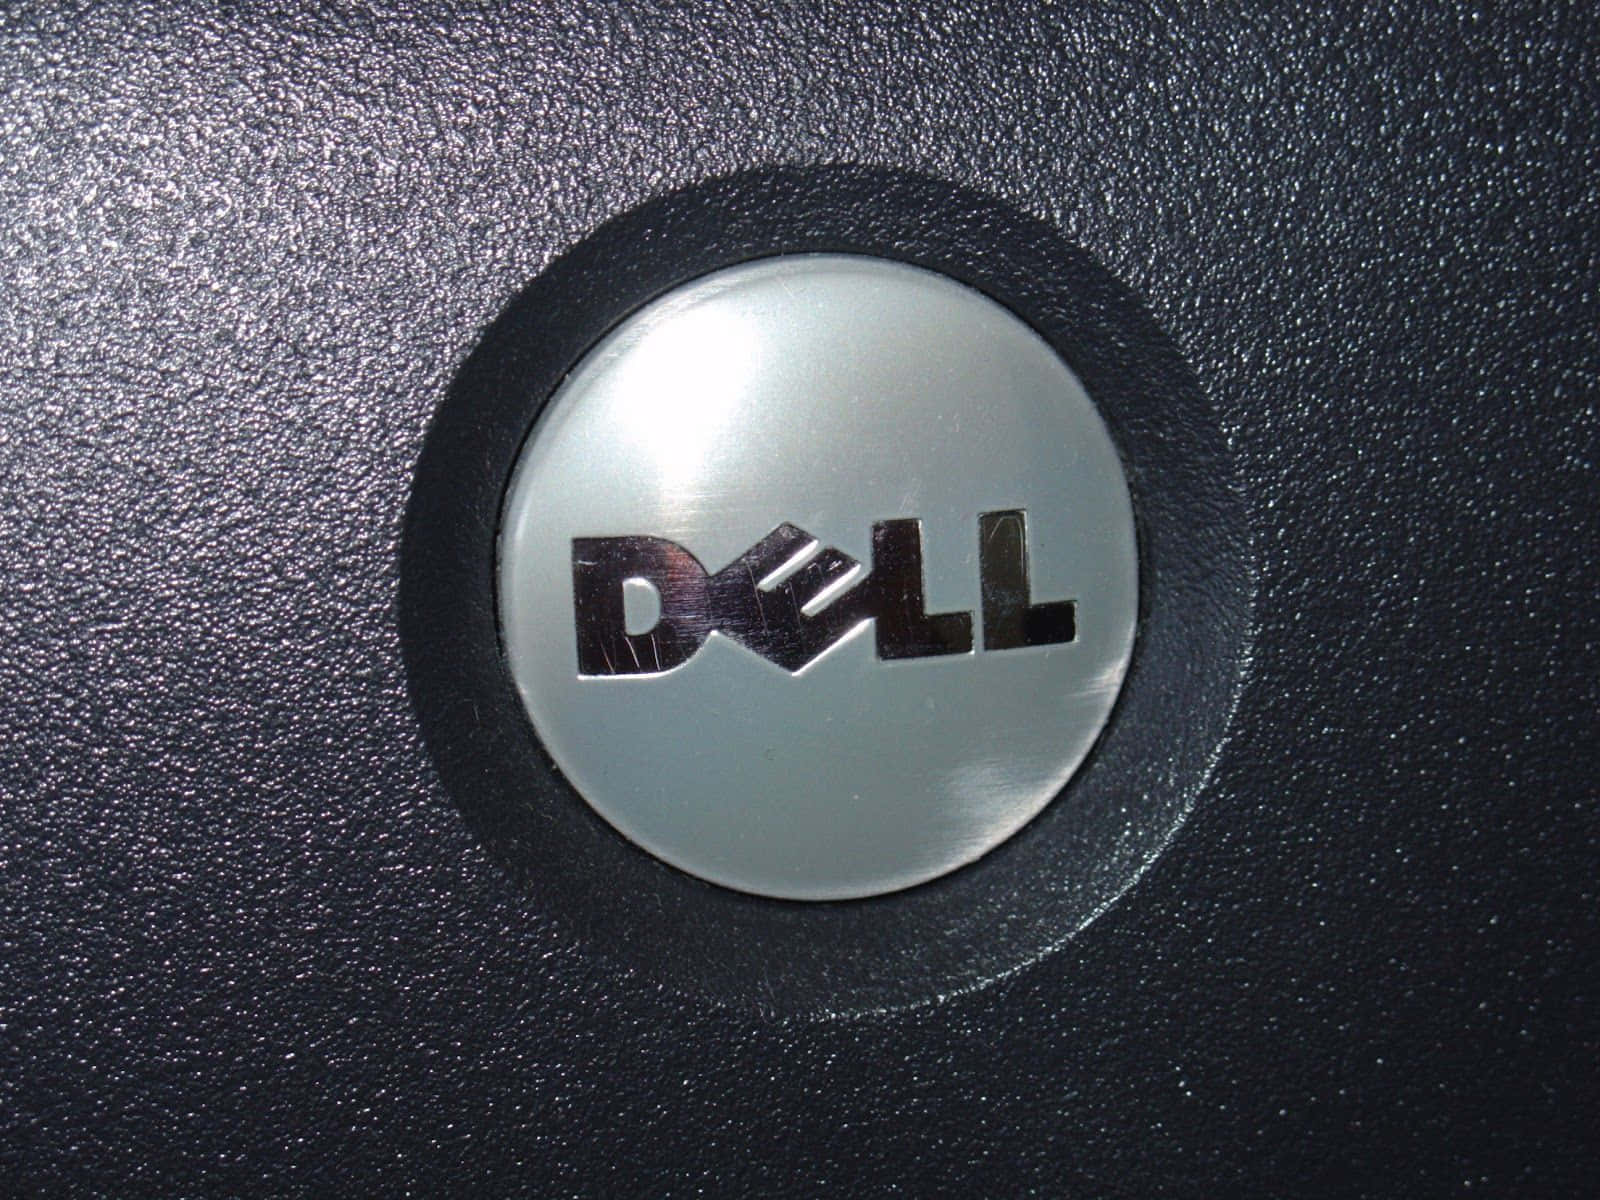 Sky's the limit with Dell